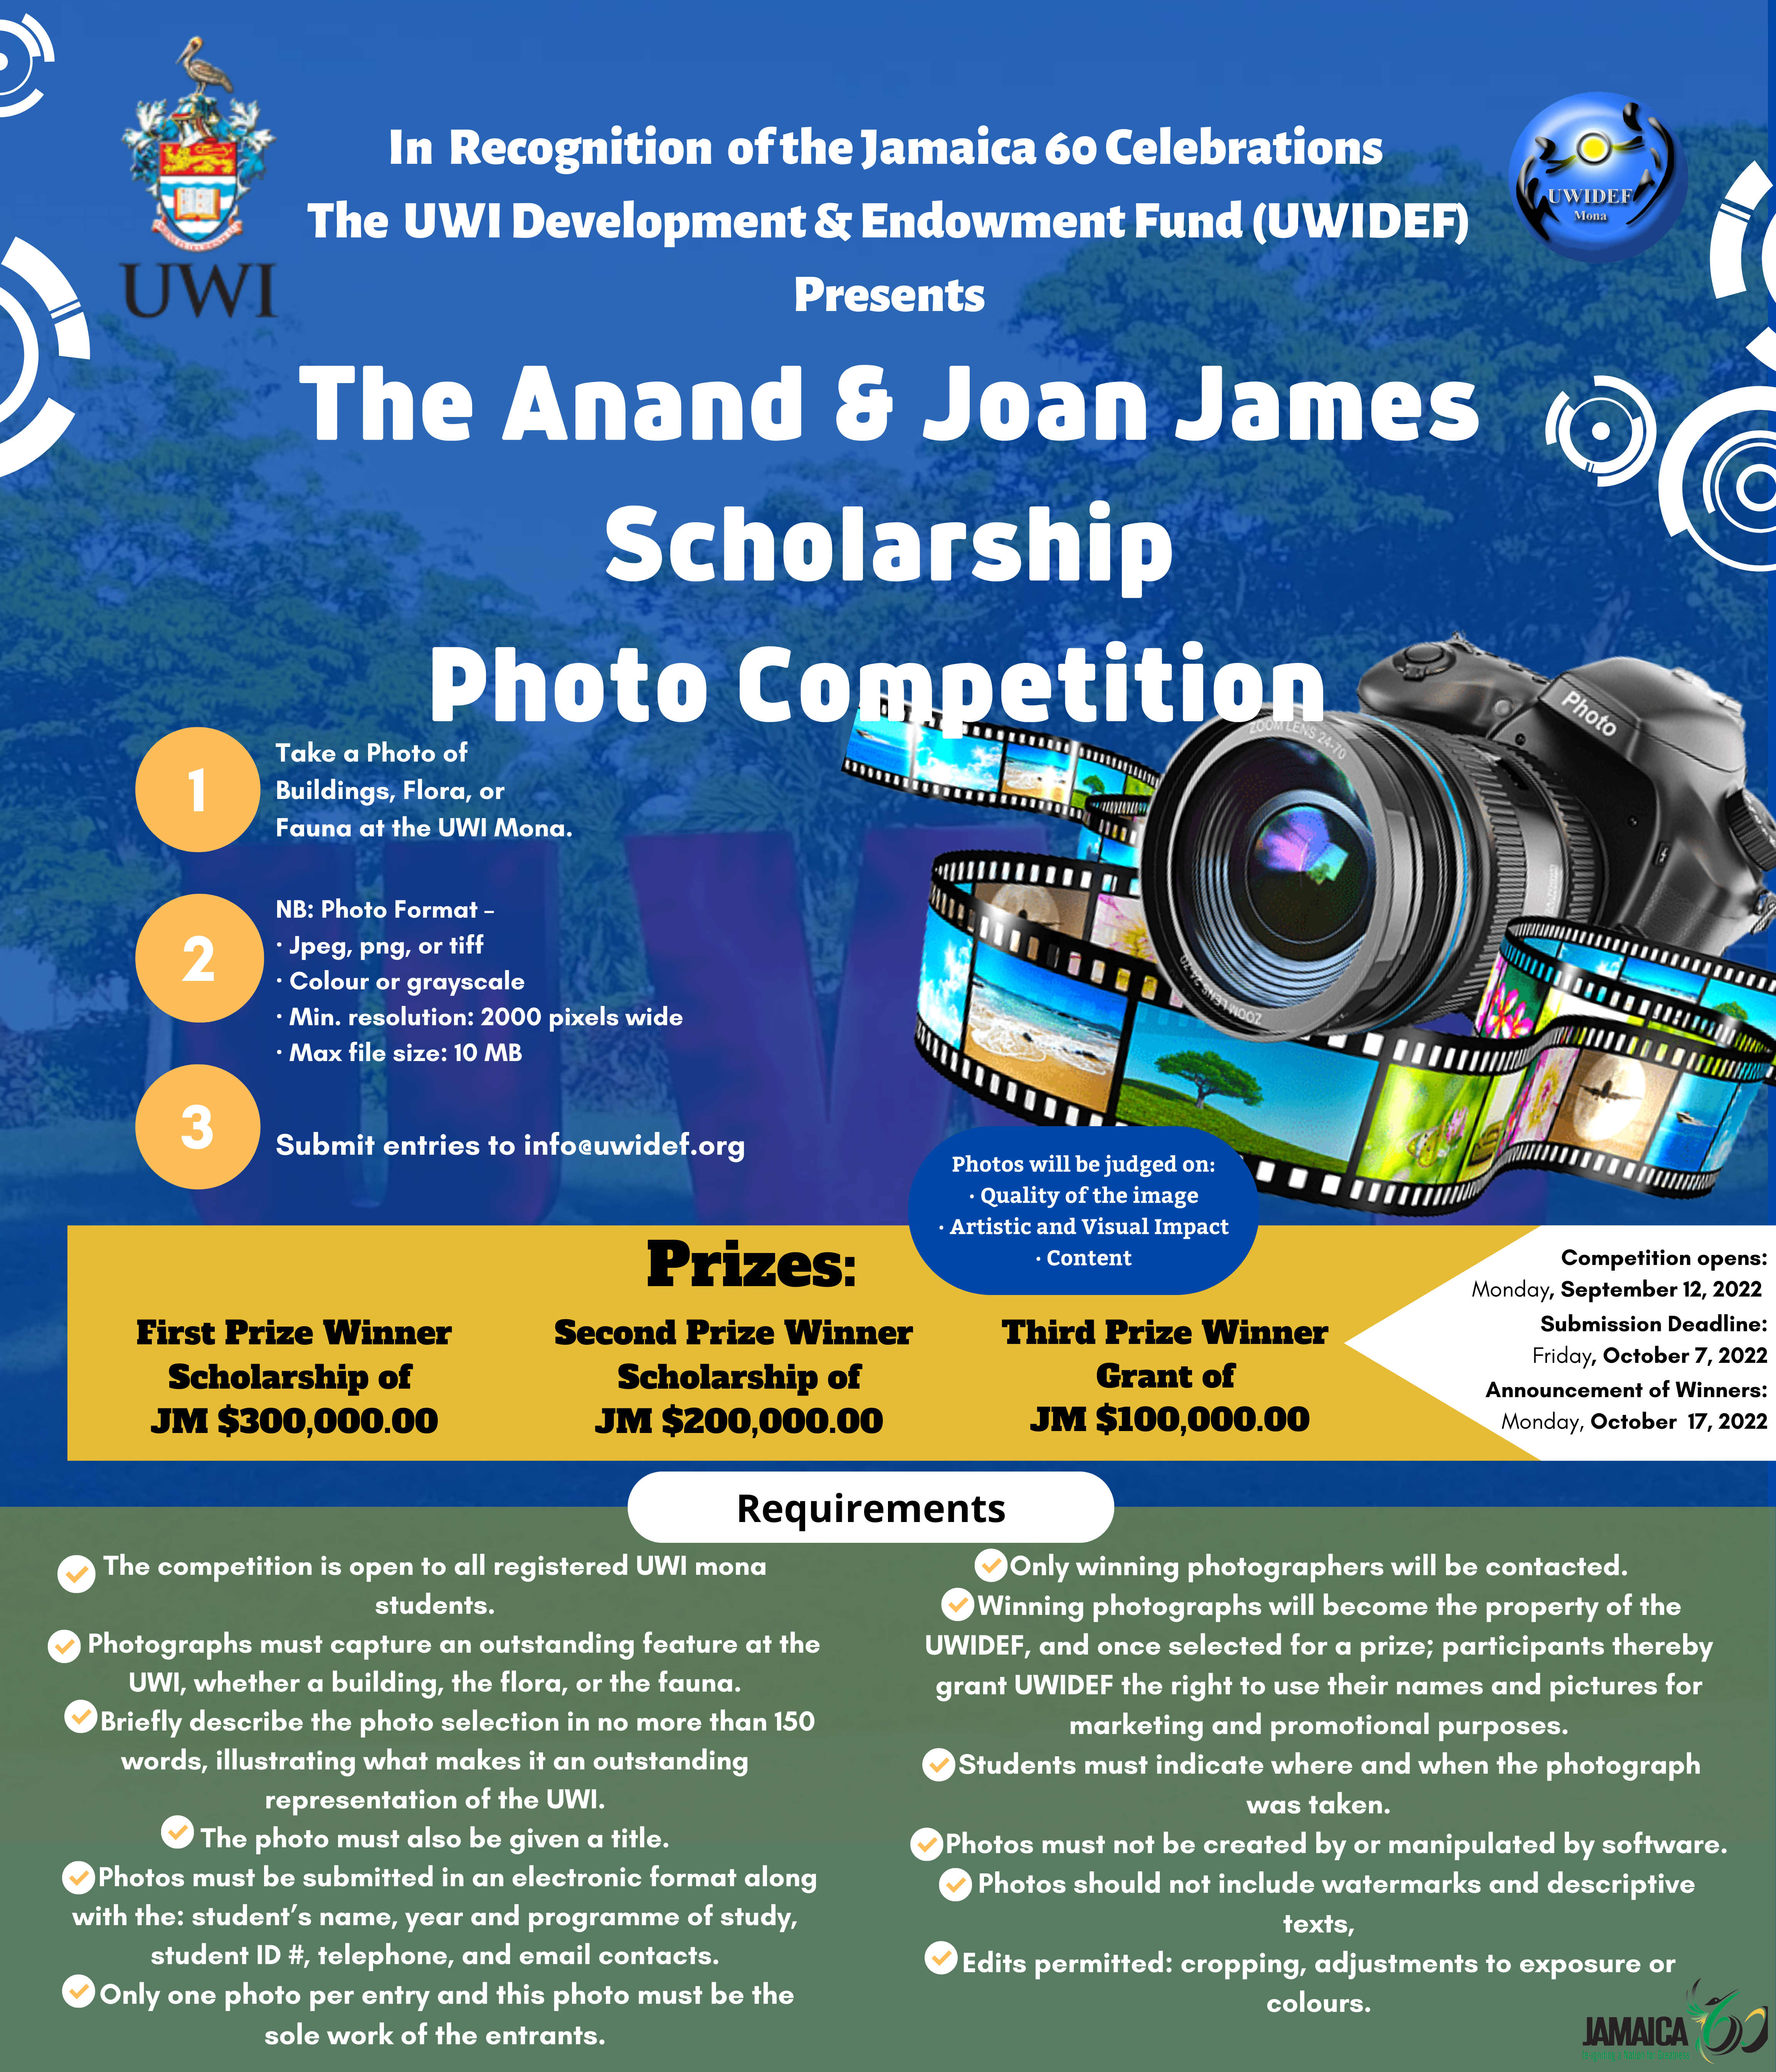 The Anand & Joan James Scholarship Photo Competition